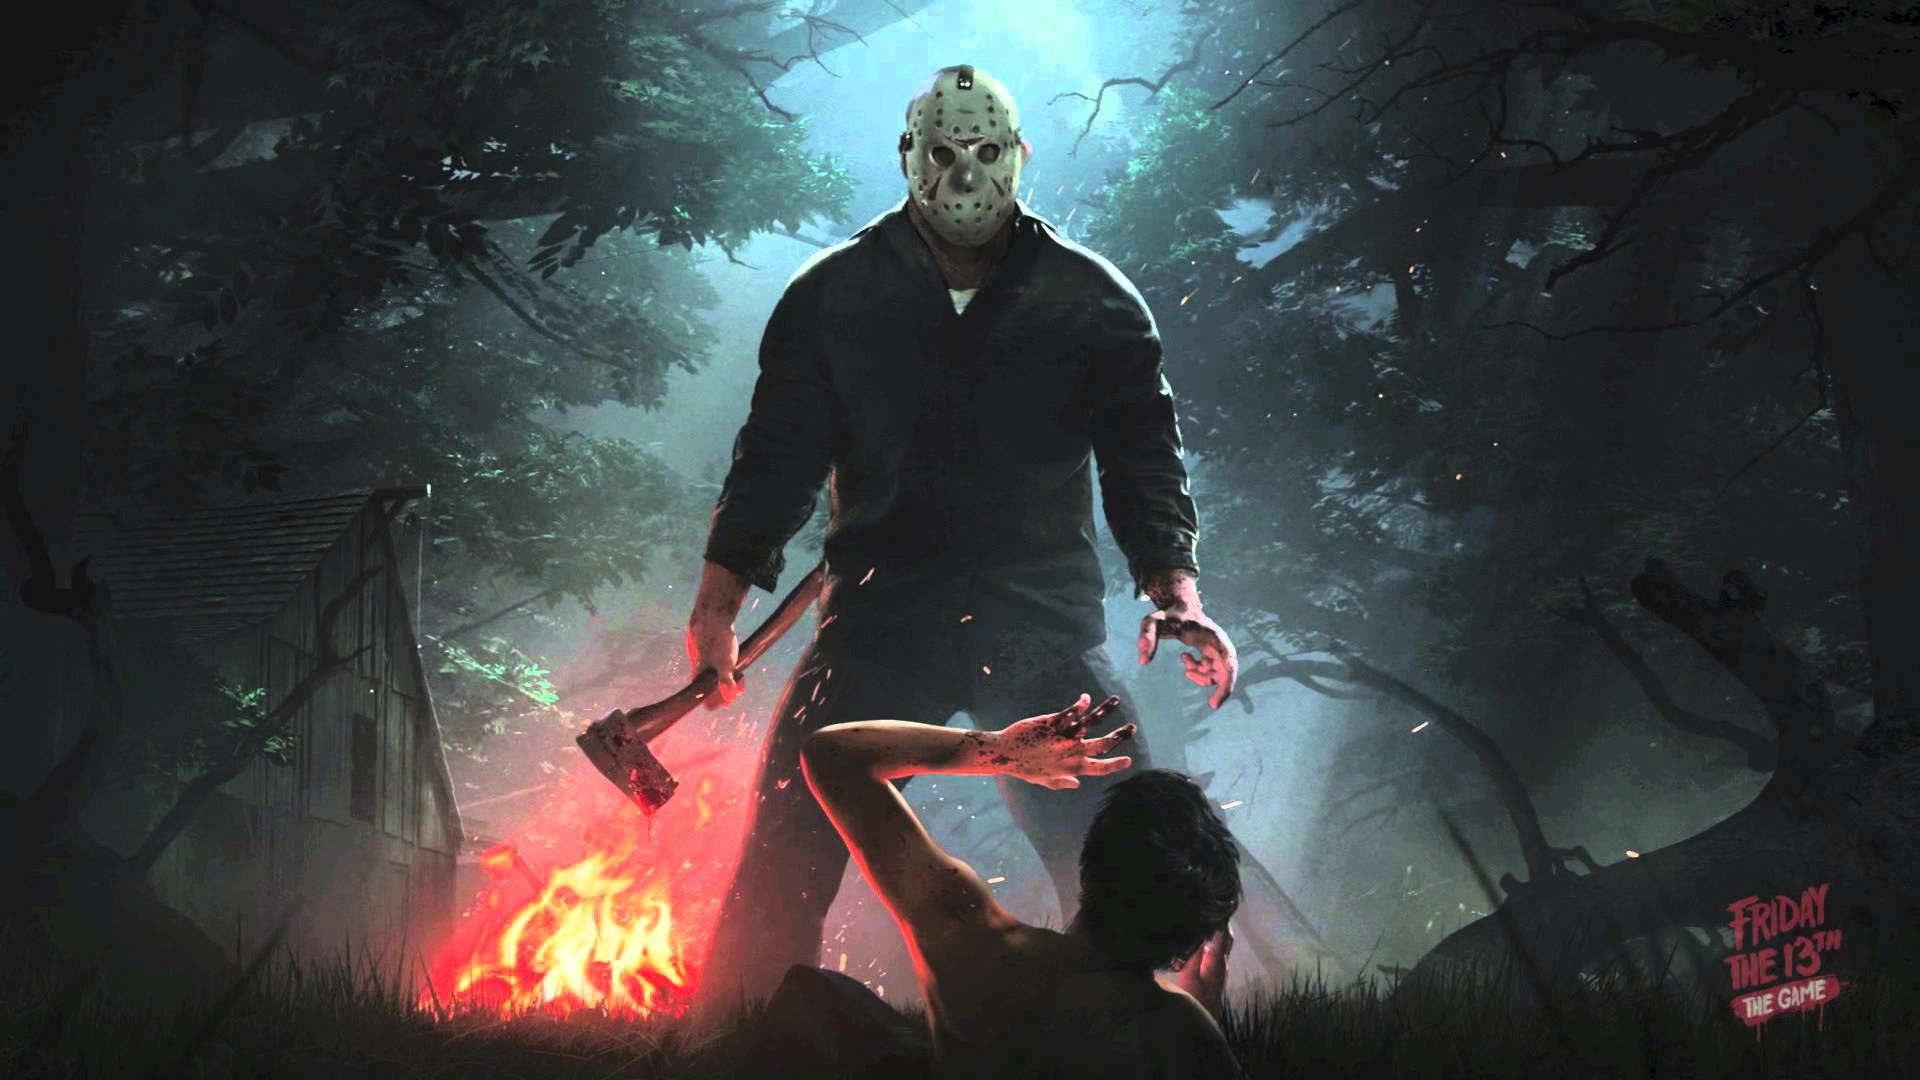 Friday the 13th The Game. Jason's coming!